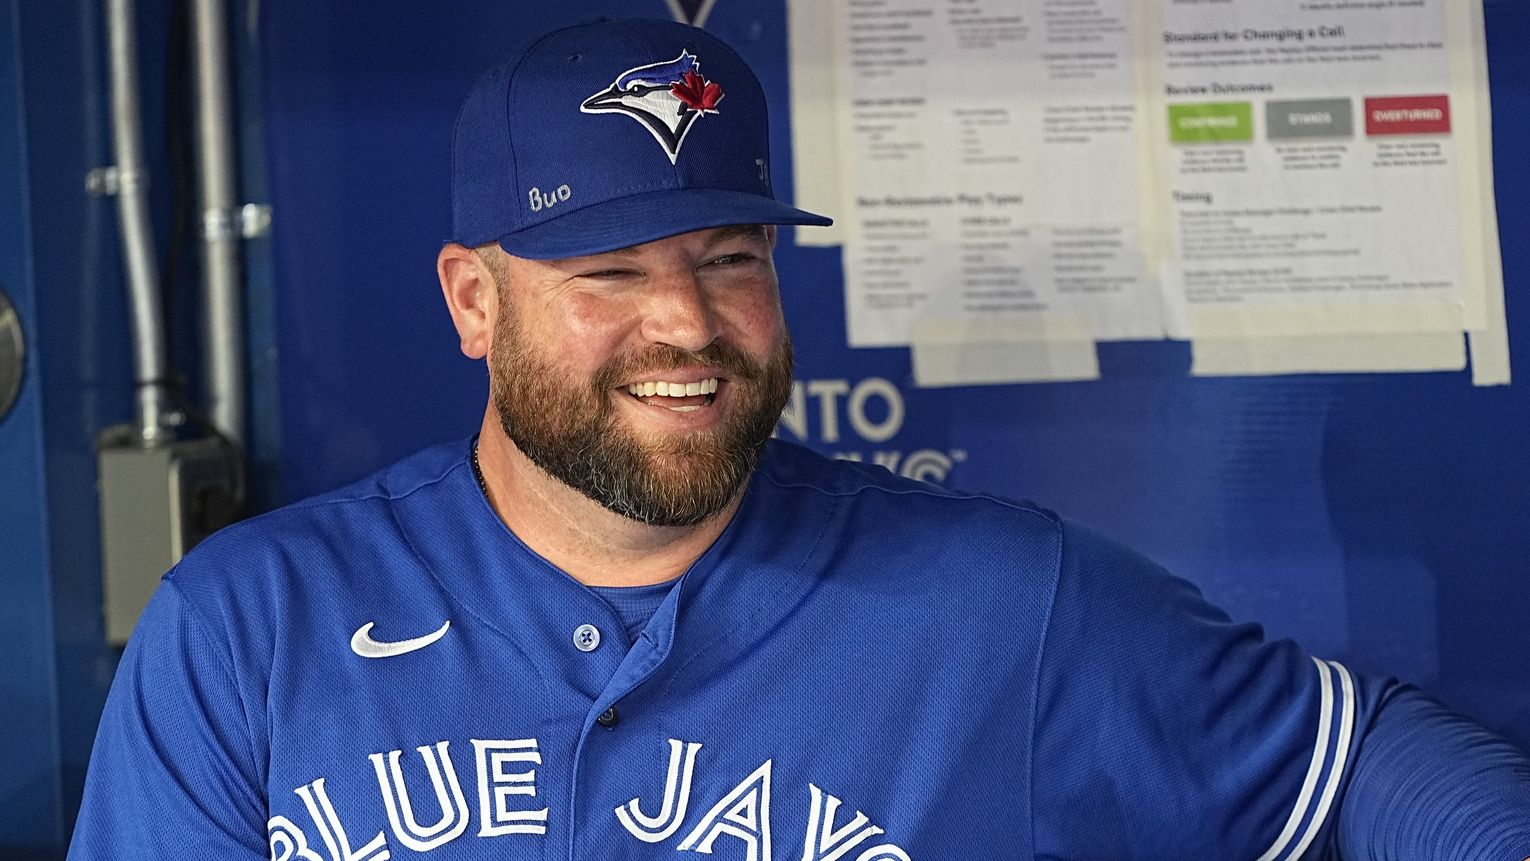 Blue Jays' manager literally saved someone's life